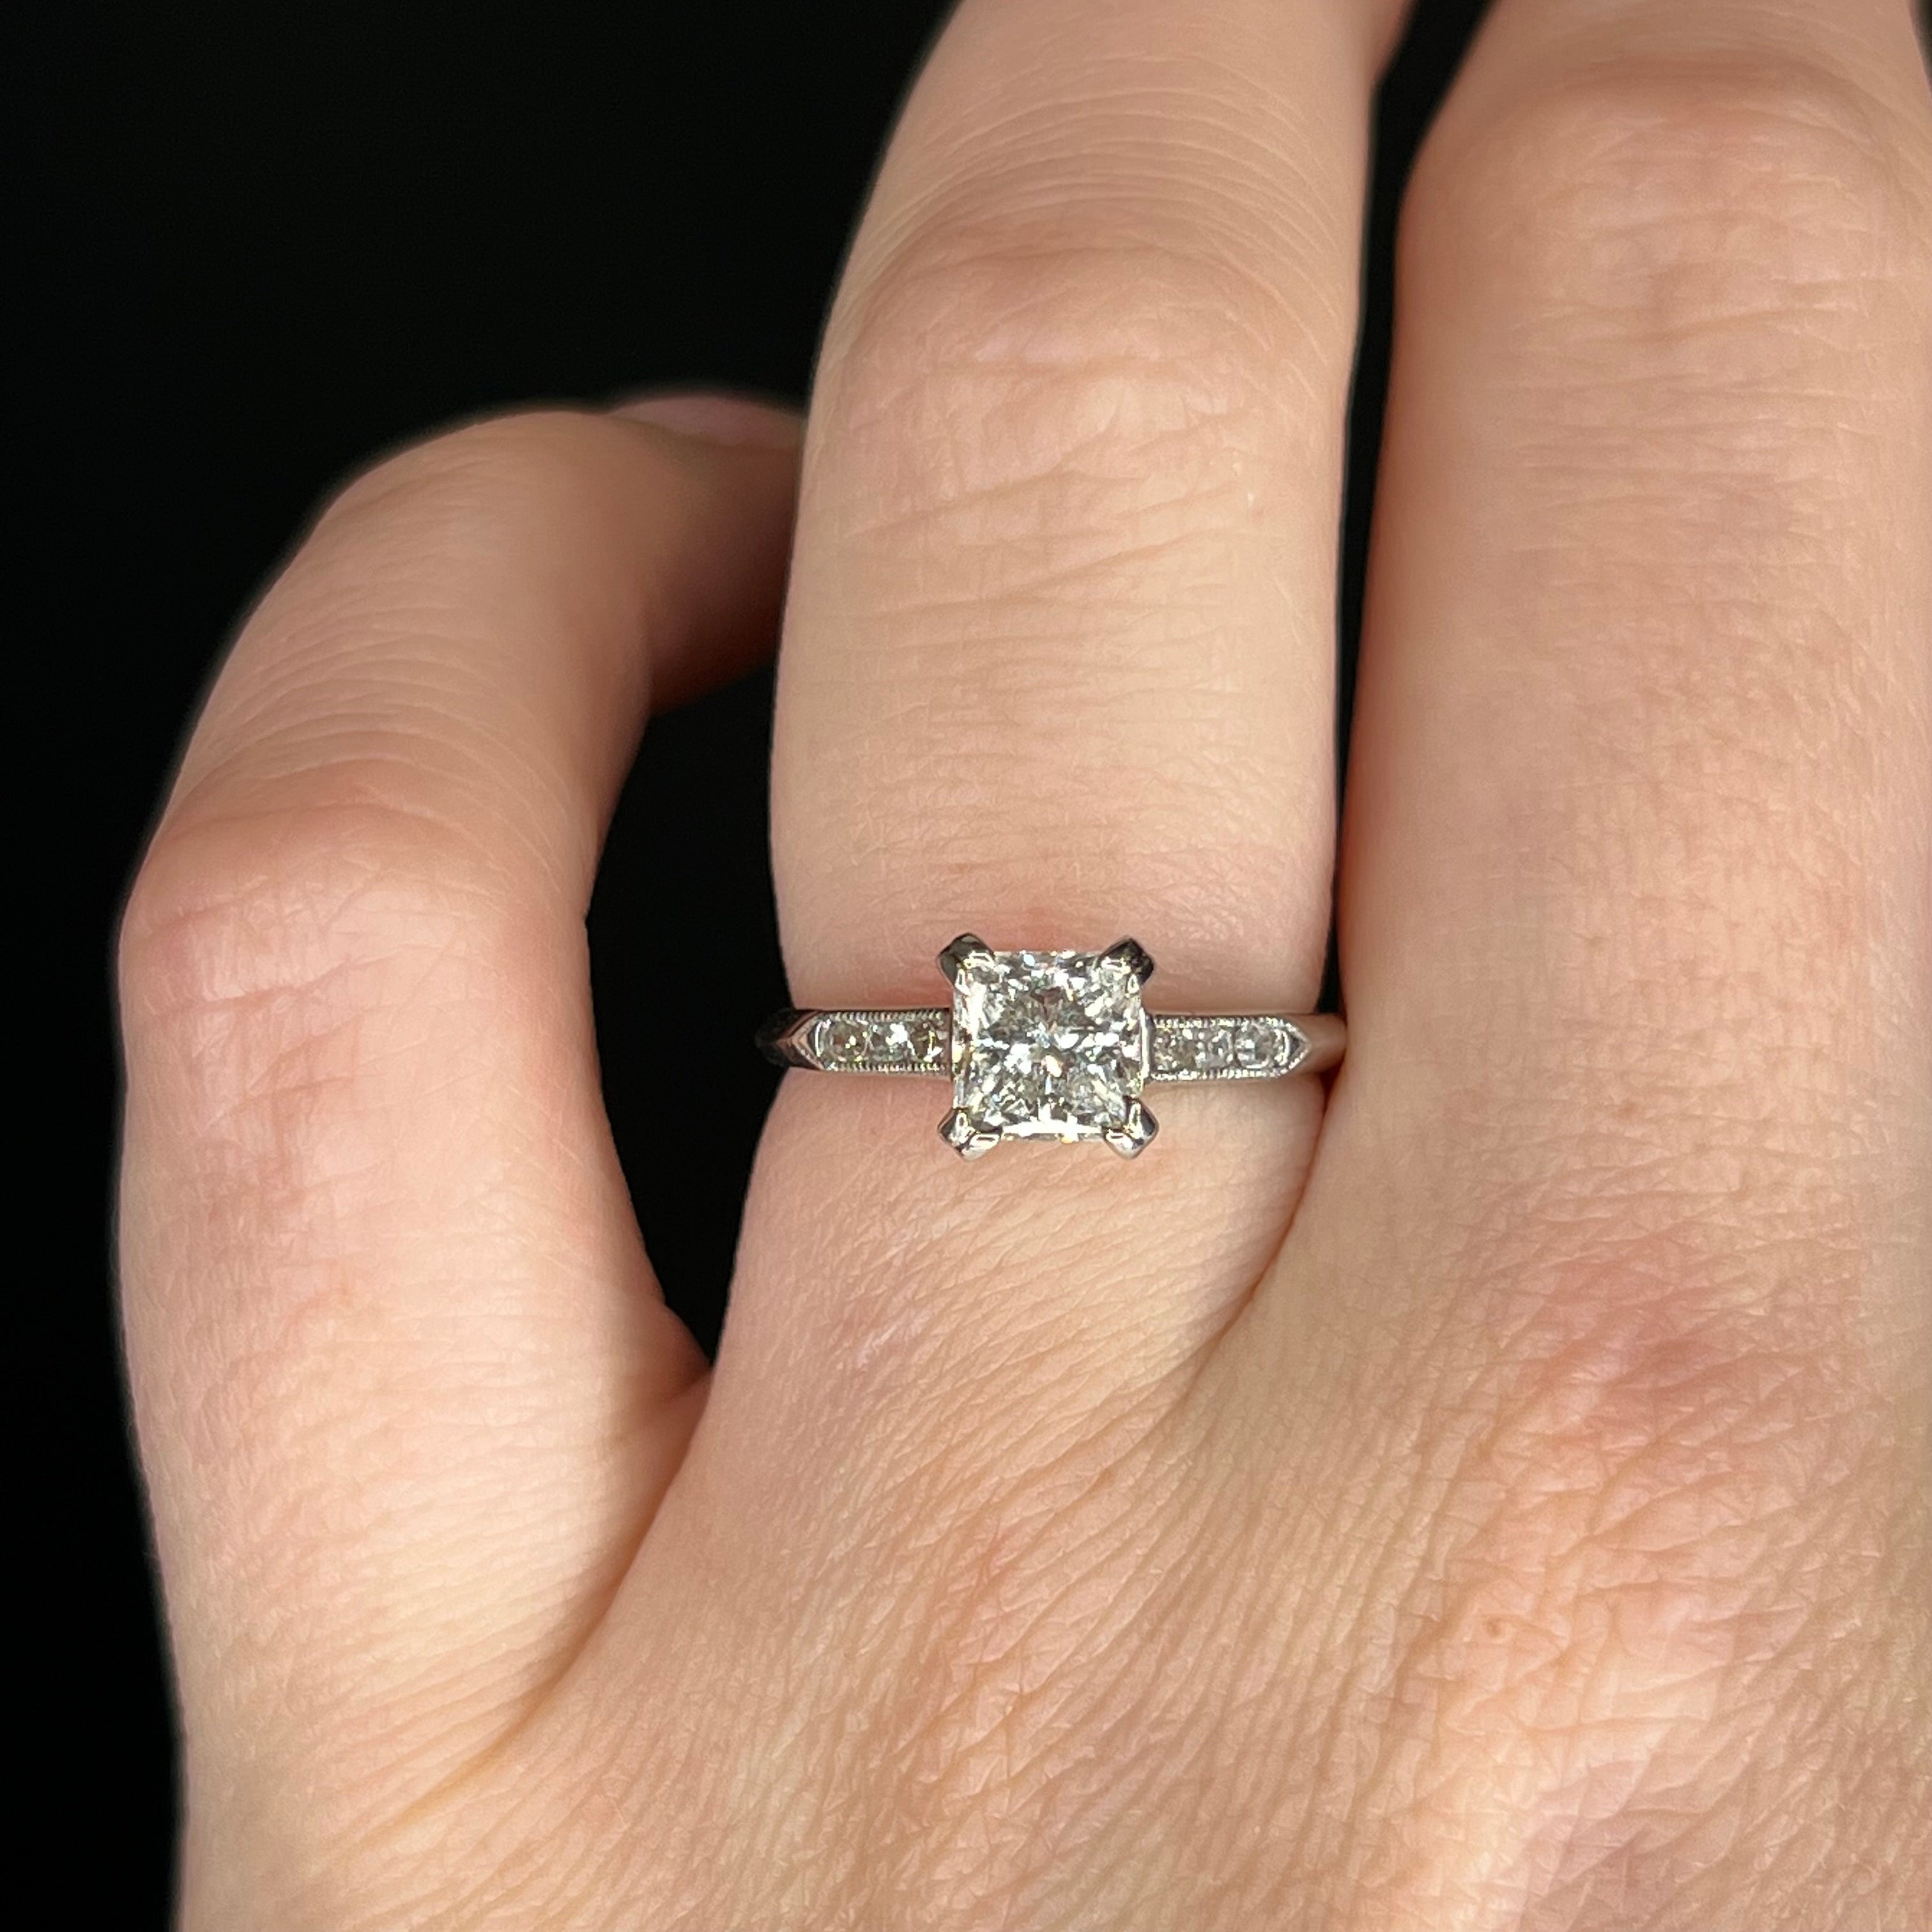 30 Unforgettable Princess Cut Engagement Rings To Get Her Heart | Engagement  ring cuts, Engagement rings halo princess cut, Future engagement rings